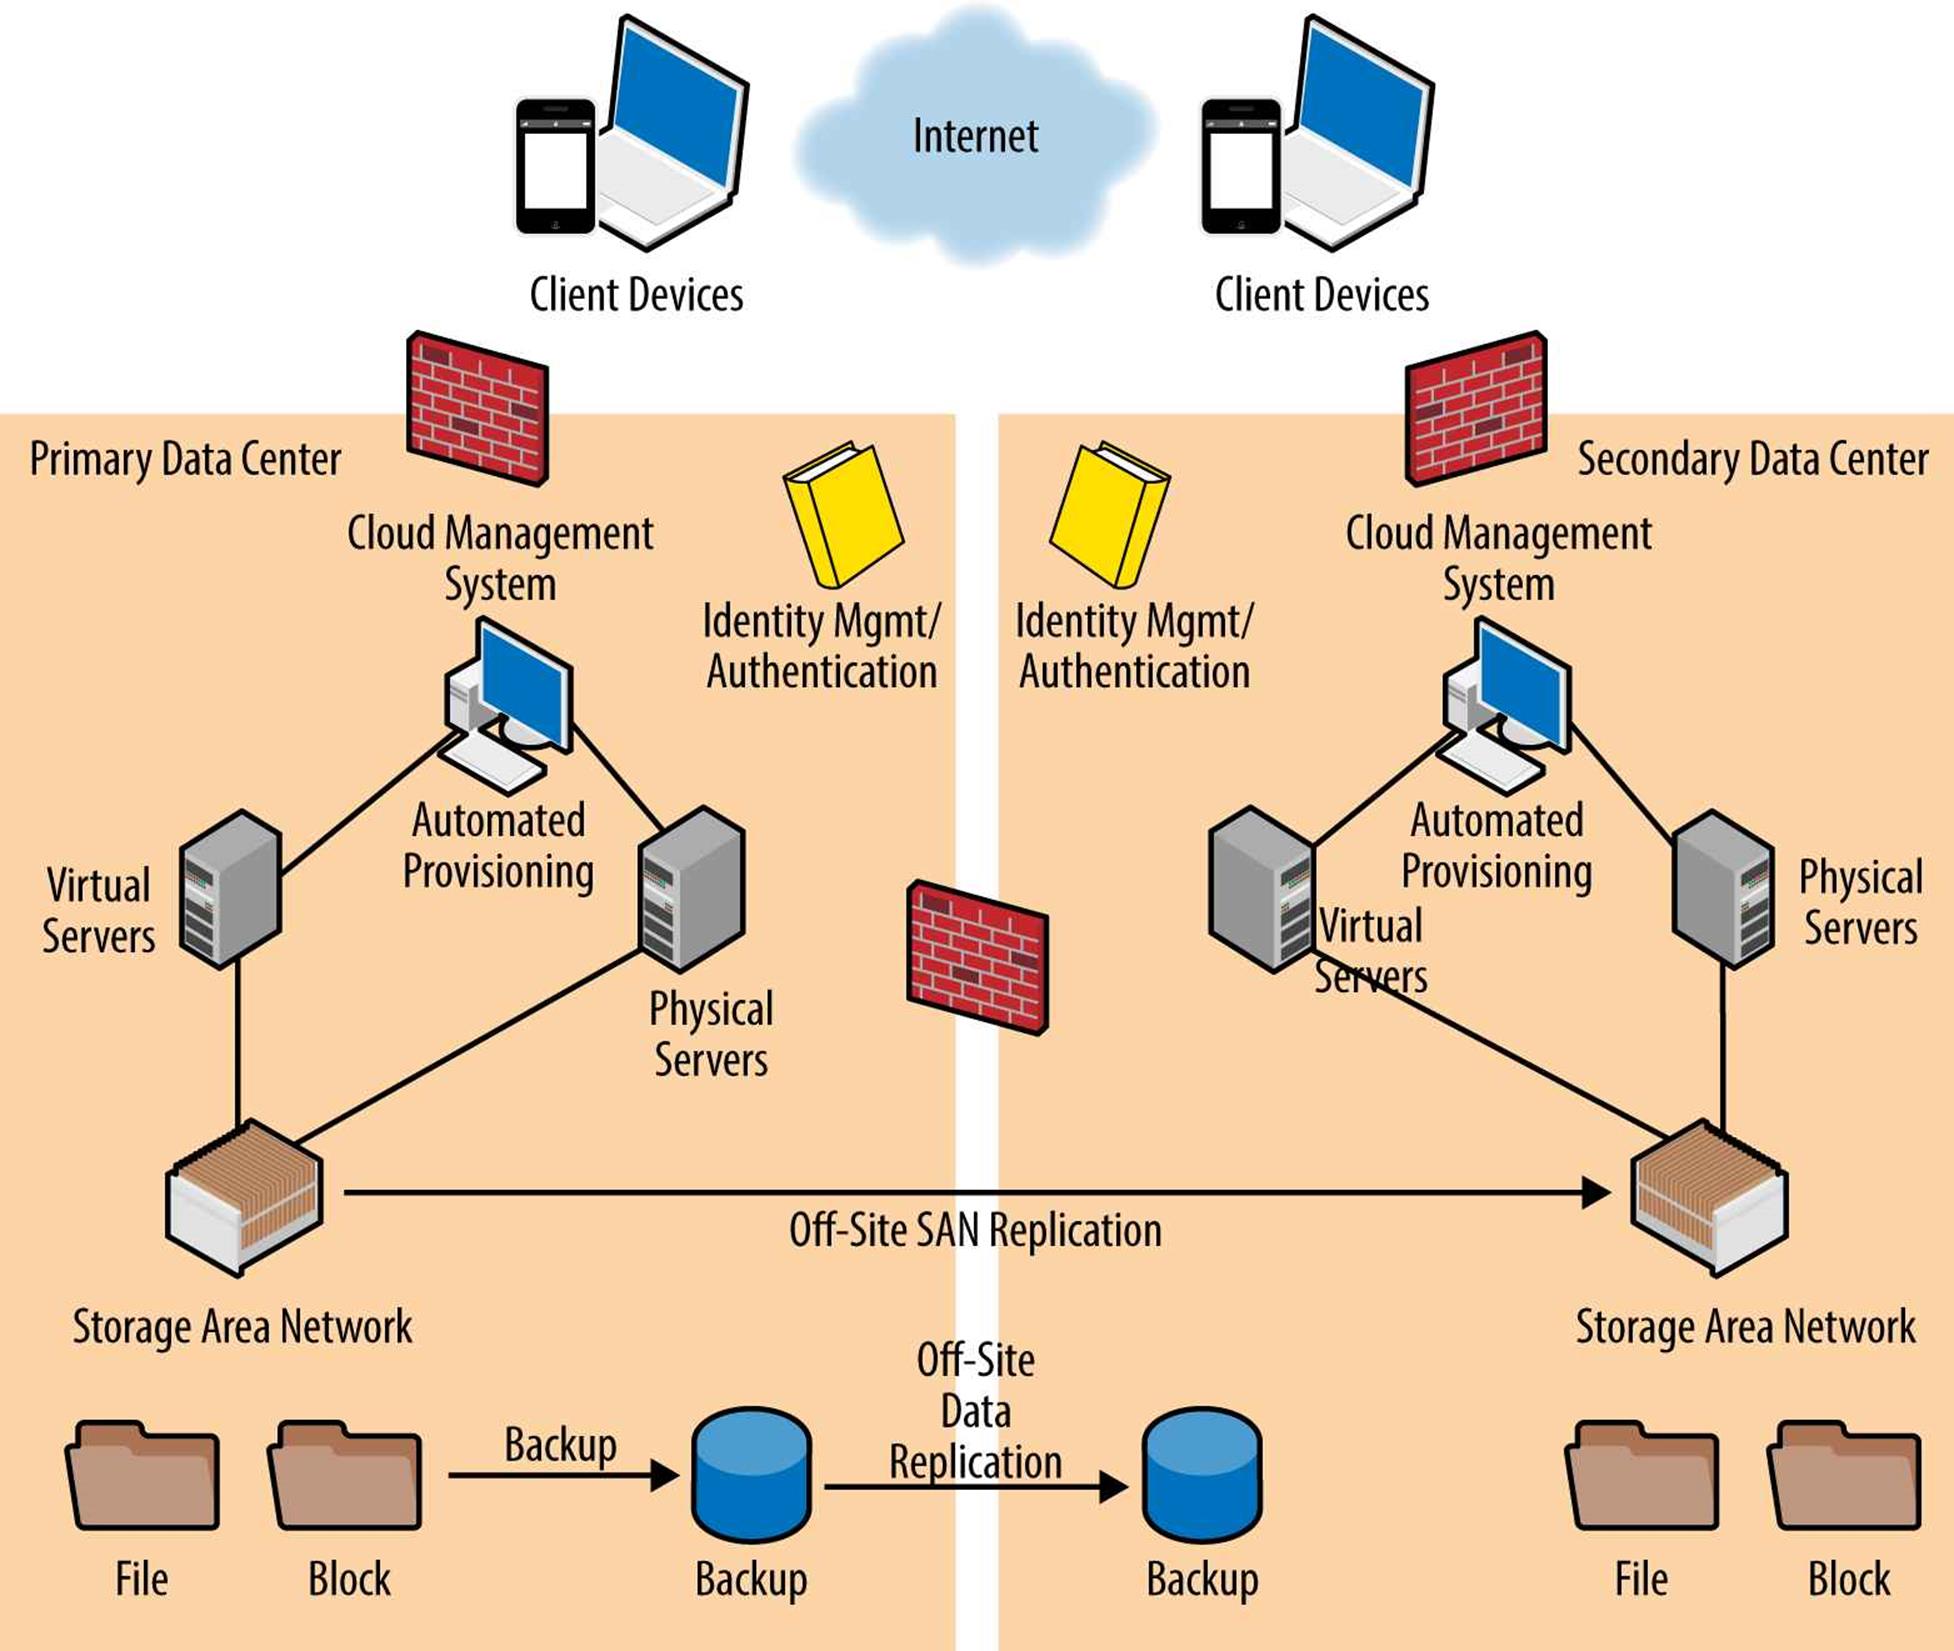 Typical network and server infrastructure (logical depiction)